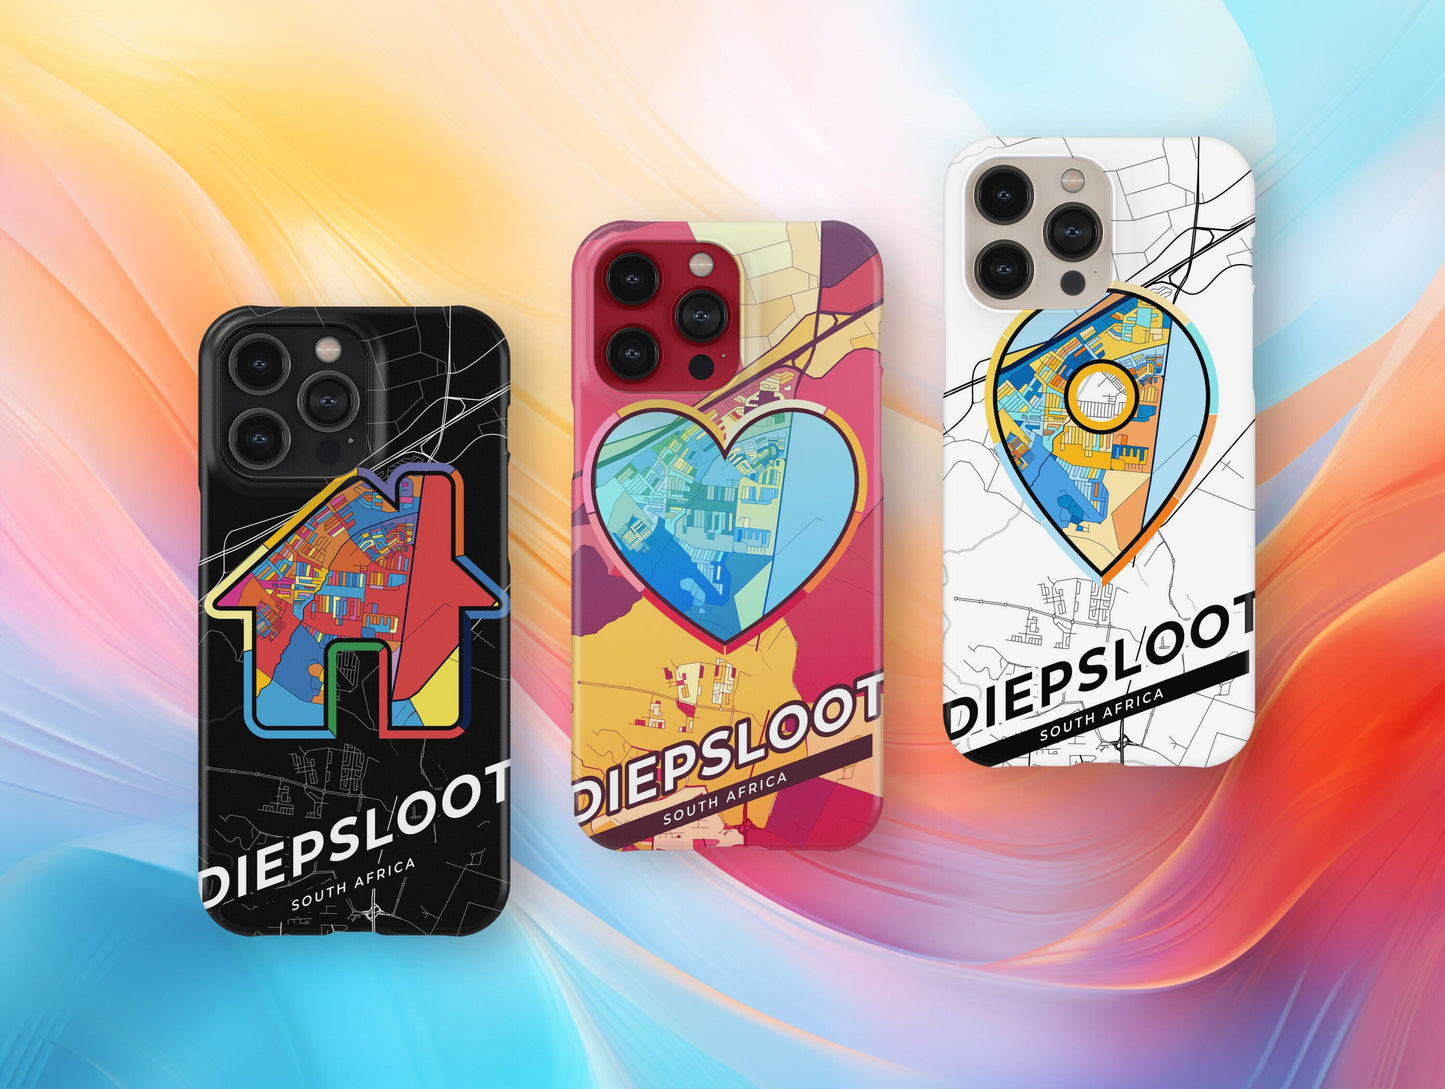 Diepsloot South Africa slim phone case with colorful icon. Birthday, wedding or housewarming gift. Couple match cases.